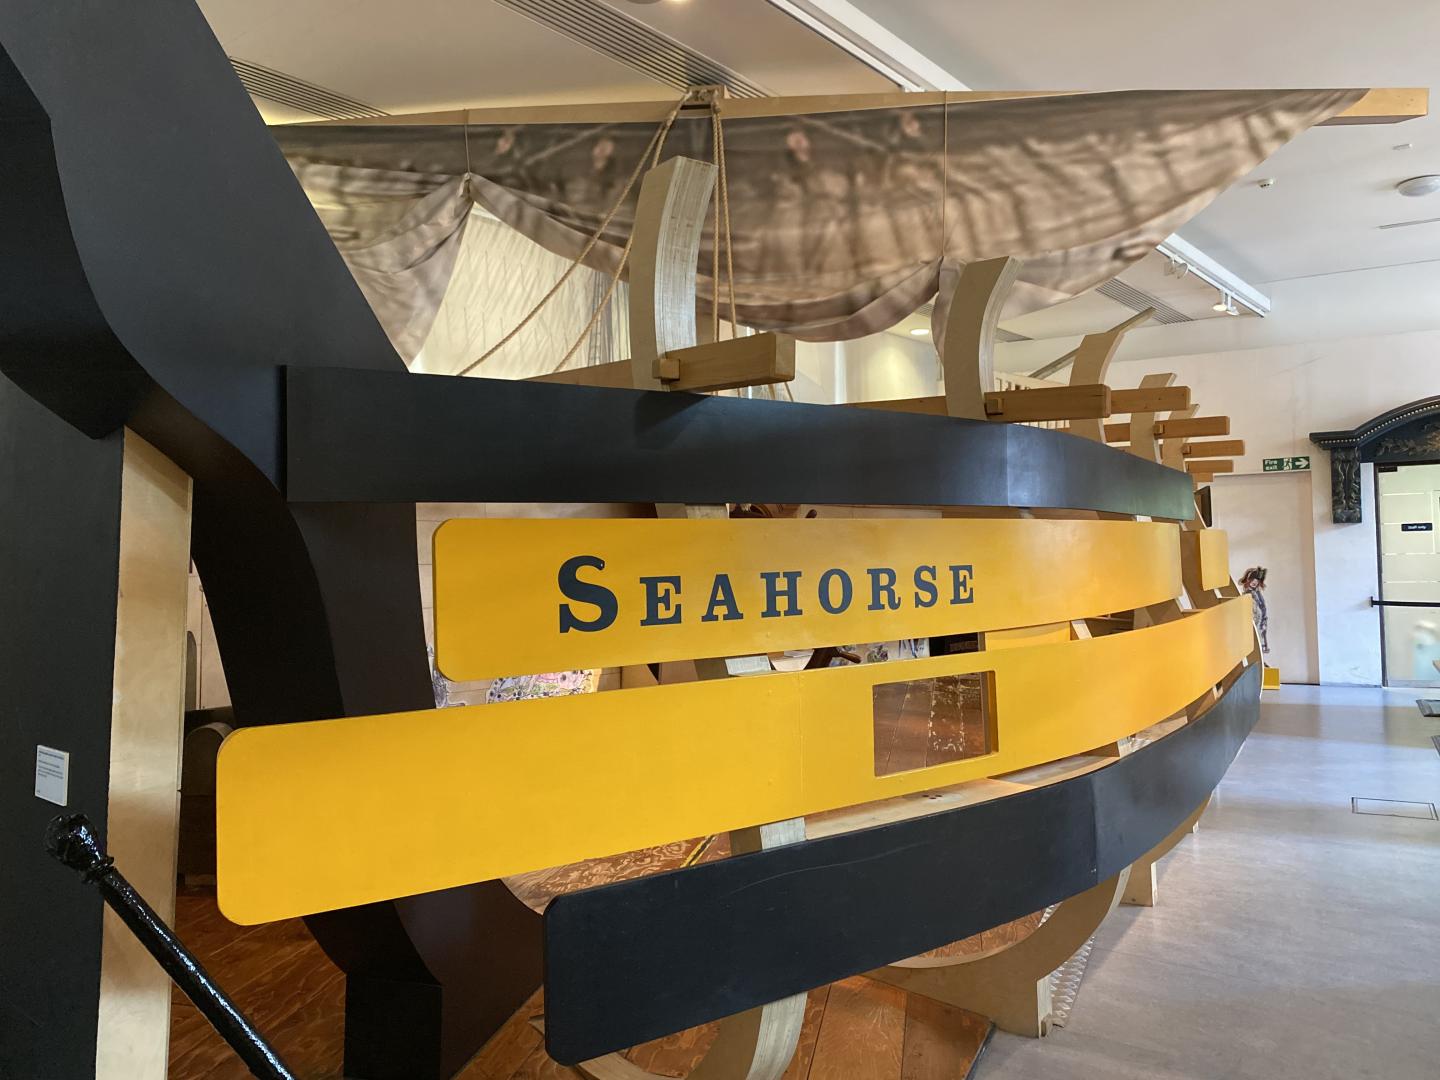 Seahorse ship for children in All Hands gallery